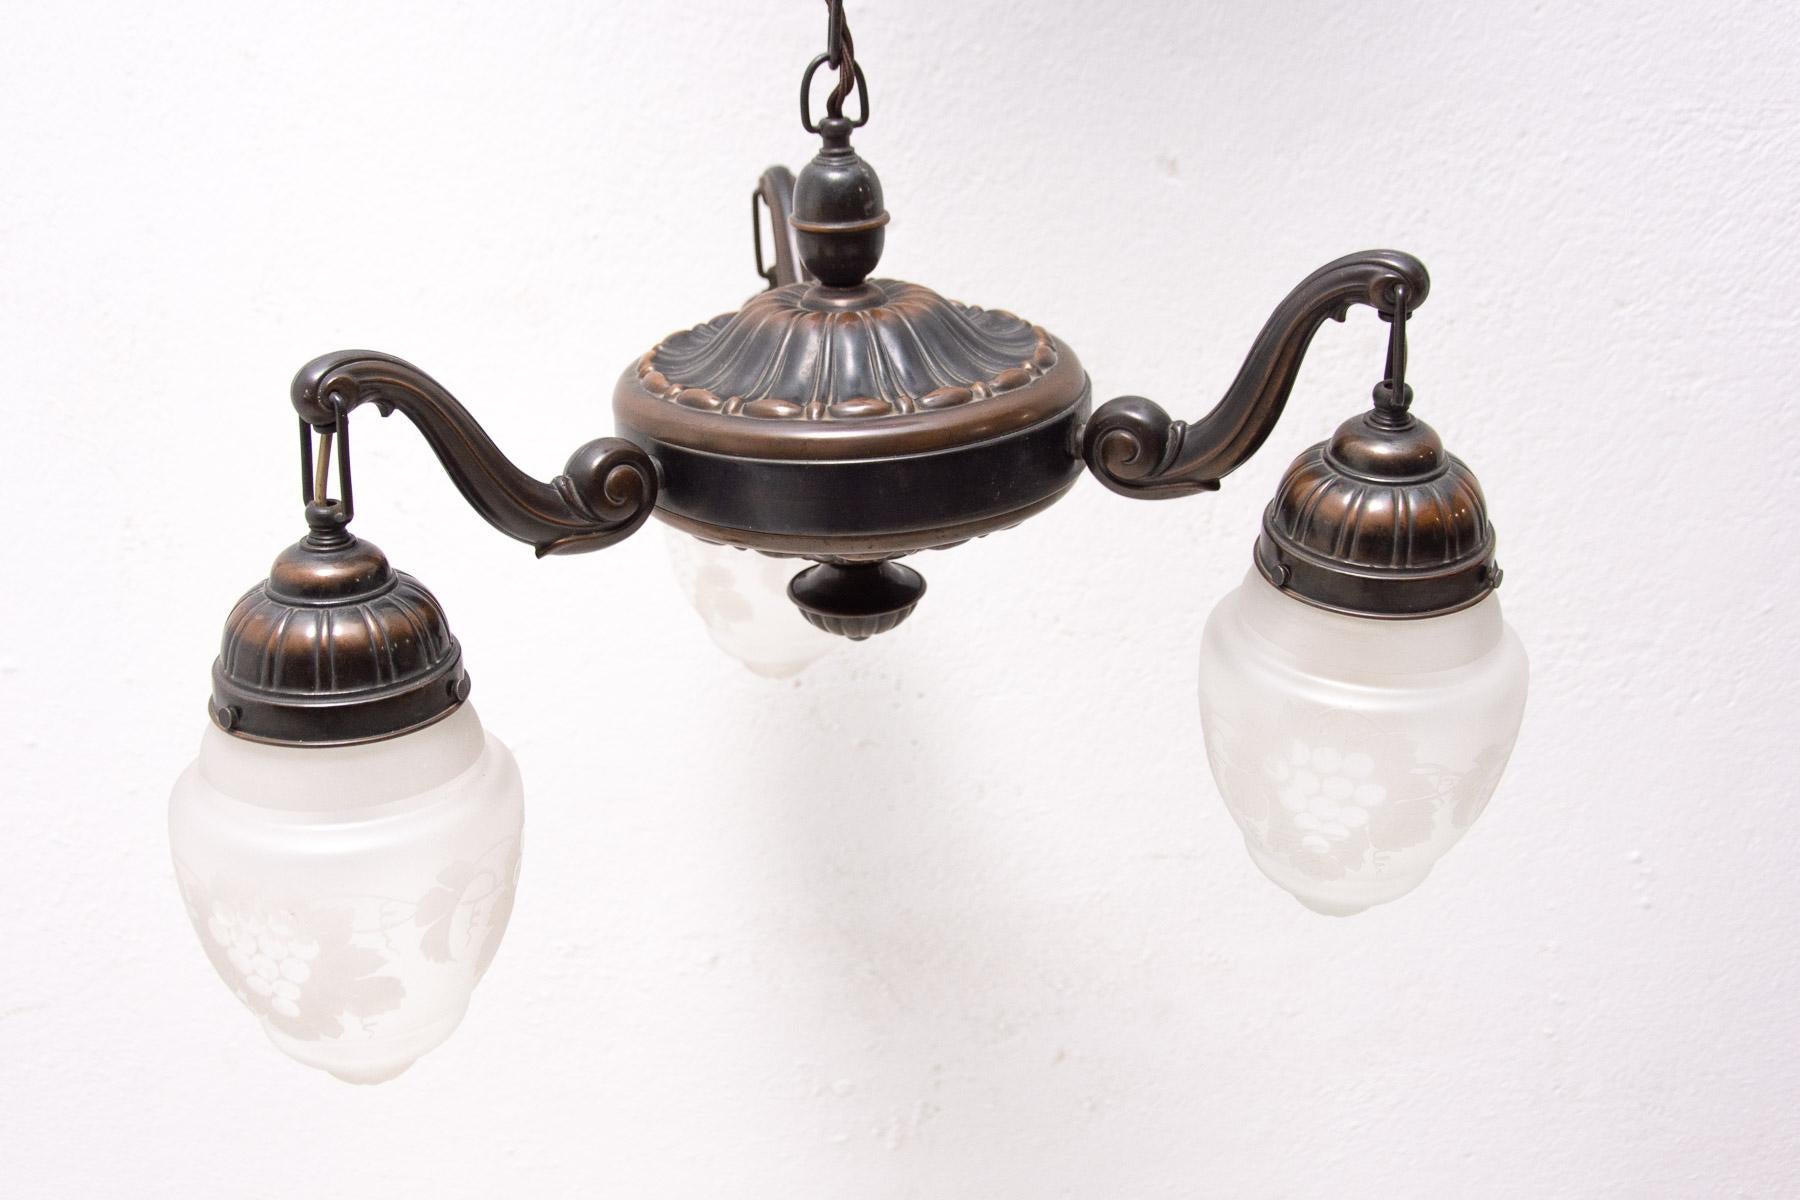 Historicizing Brass Three-Armed Chandelier, Turn of the 19th and 20th Century For Sale 6